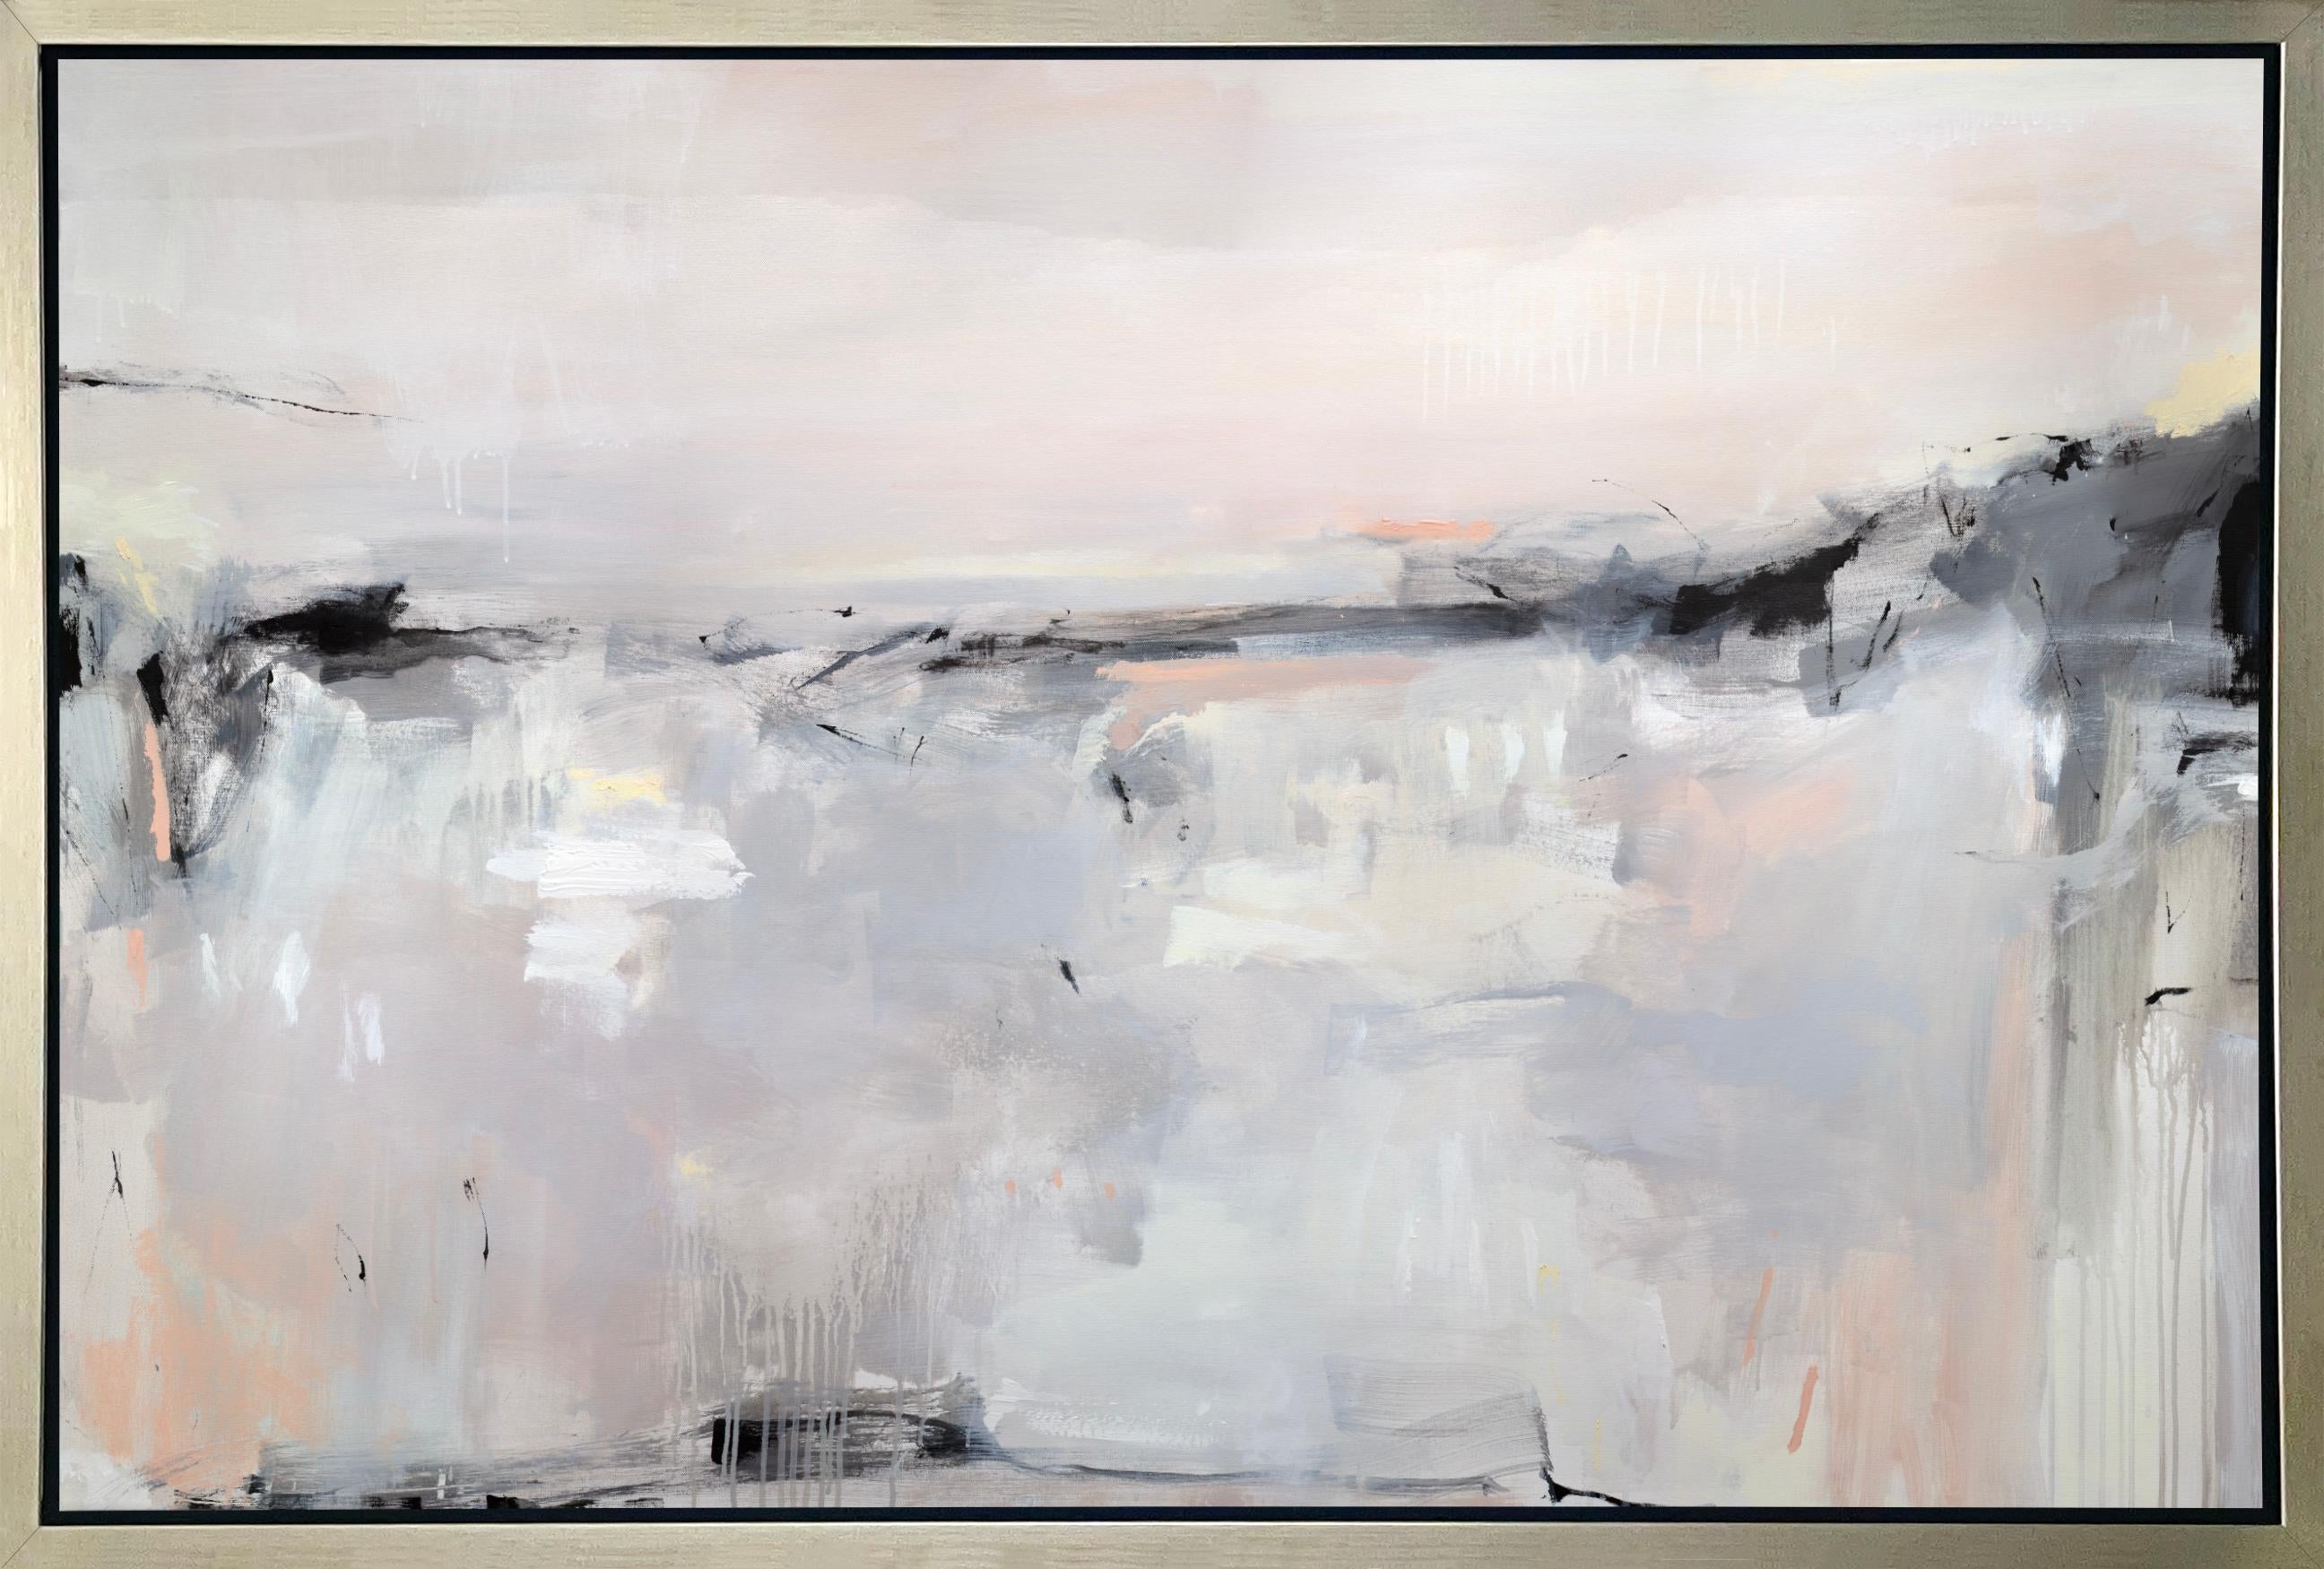 Kelly Rossetti Abstract Print - "Forever Roaming, " Framed Limited Edition Giclee Print, 36" x 54"